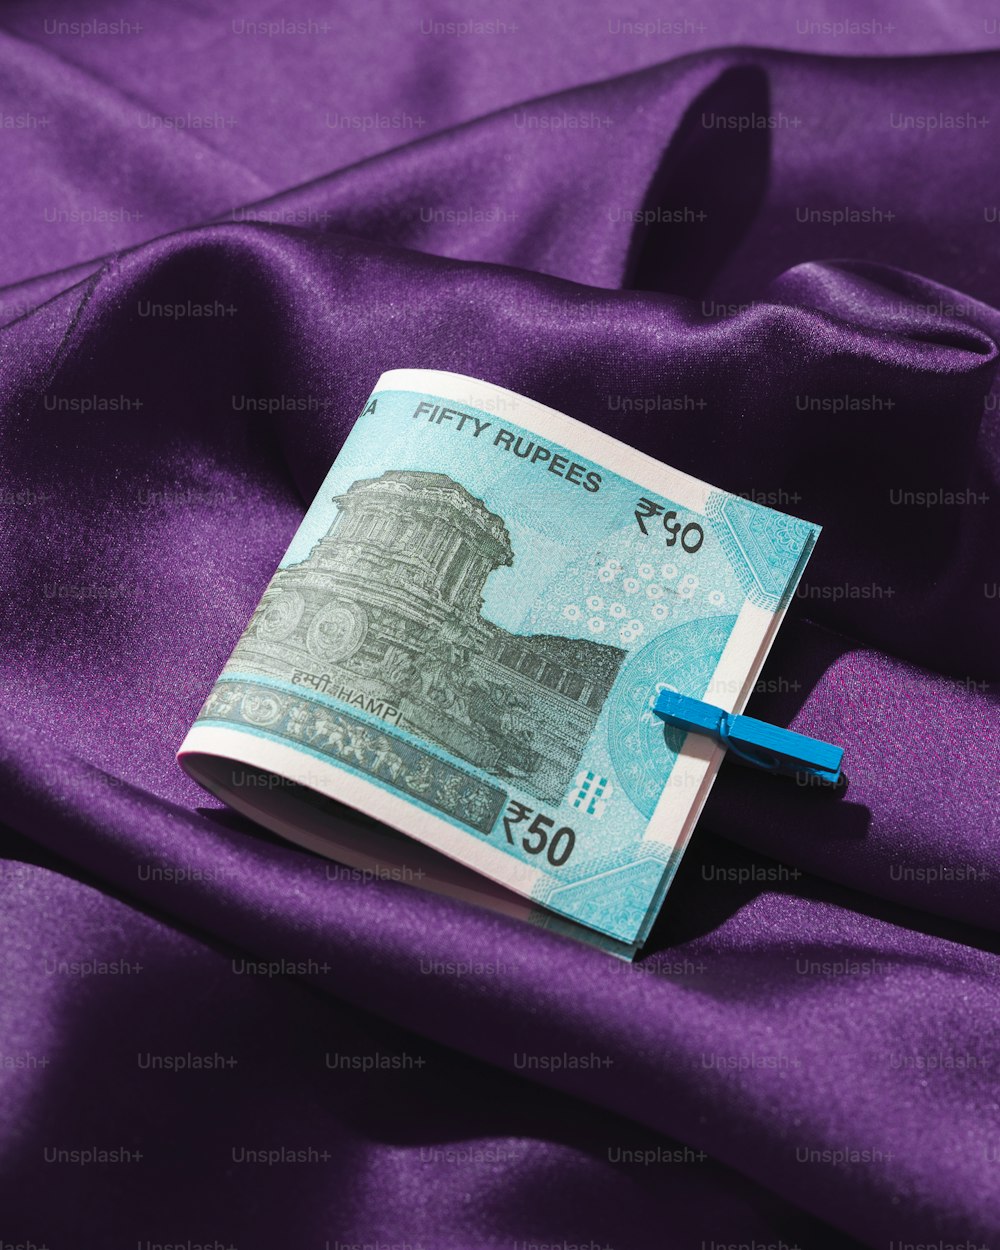 a fifty rupees note laying on a purple satin